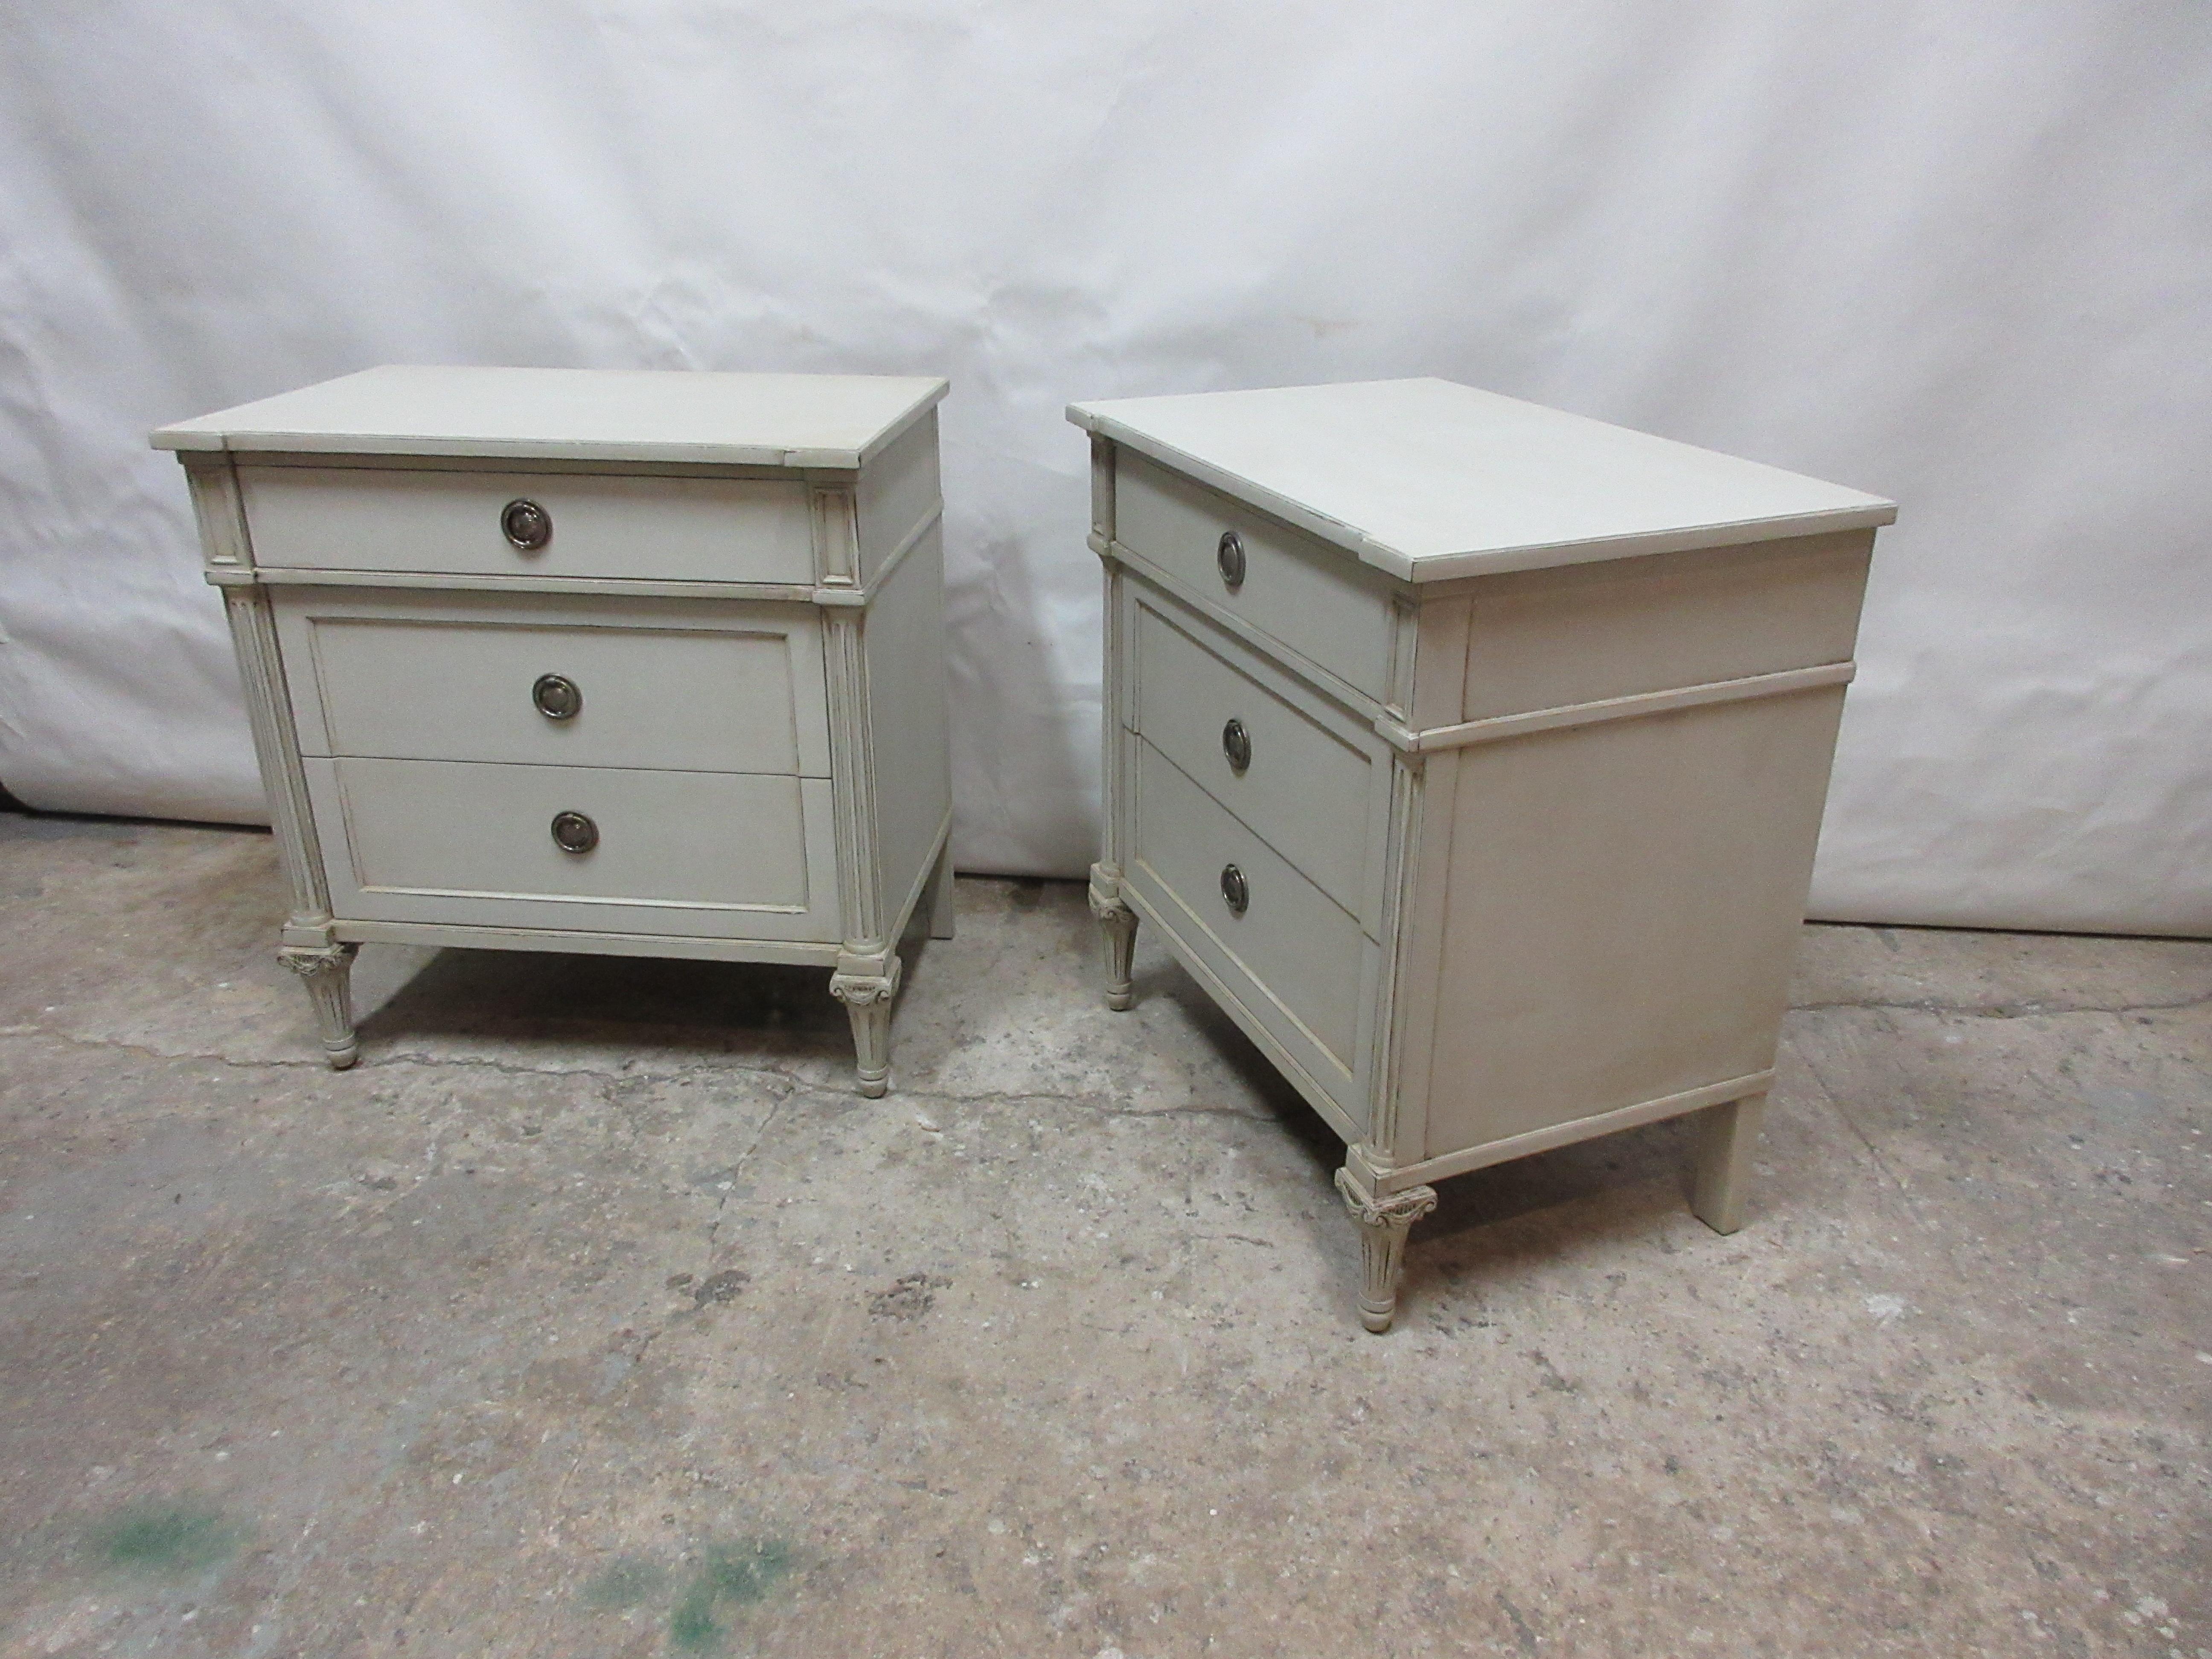 This is a set of 2 Gustavian style nightstands. They have been restored and repainted with milk paints 